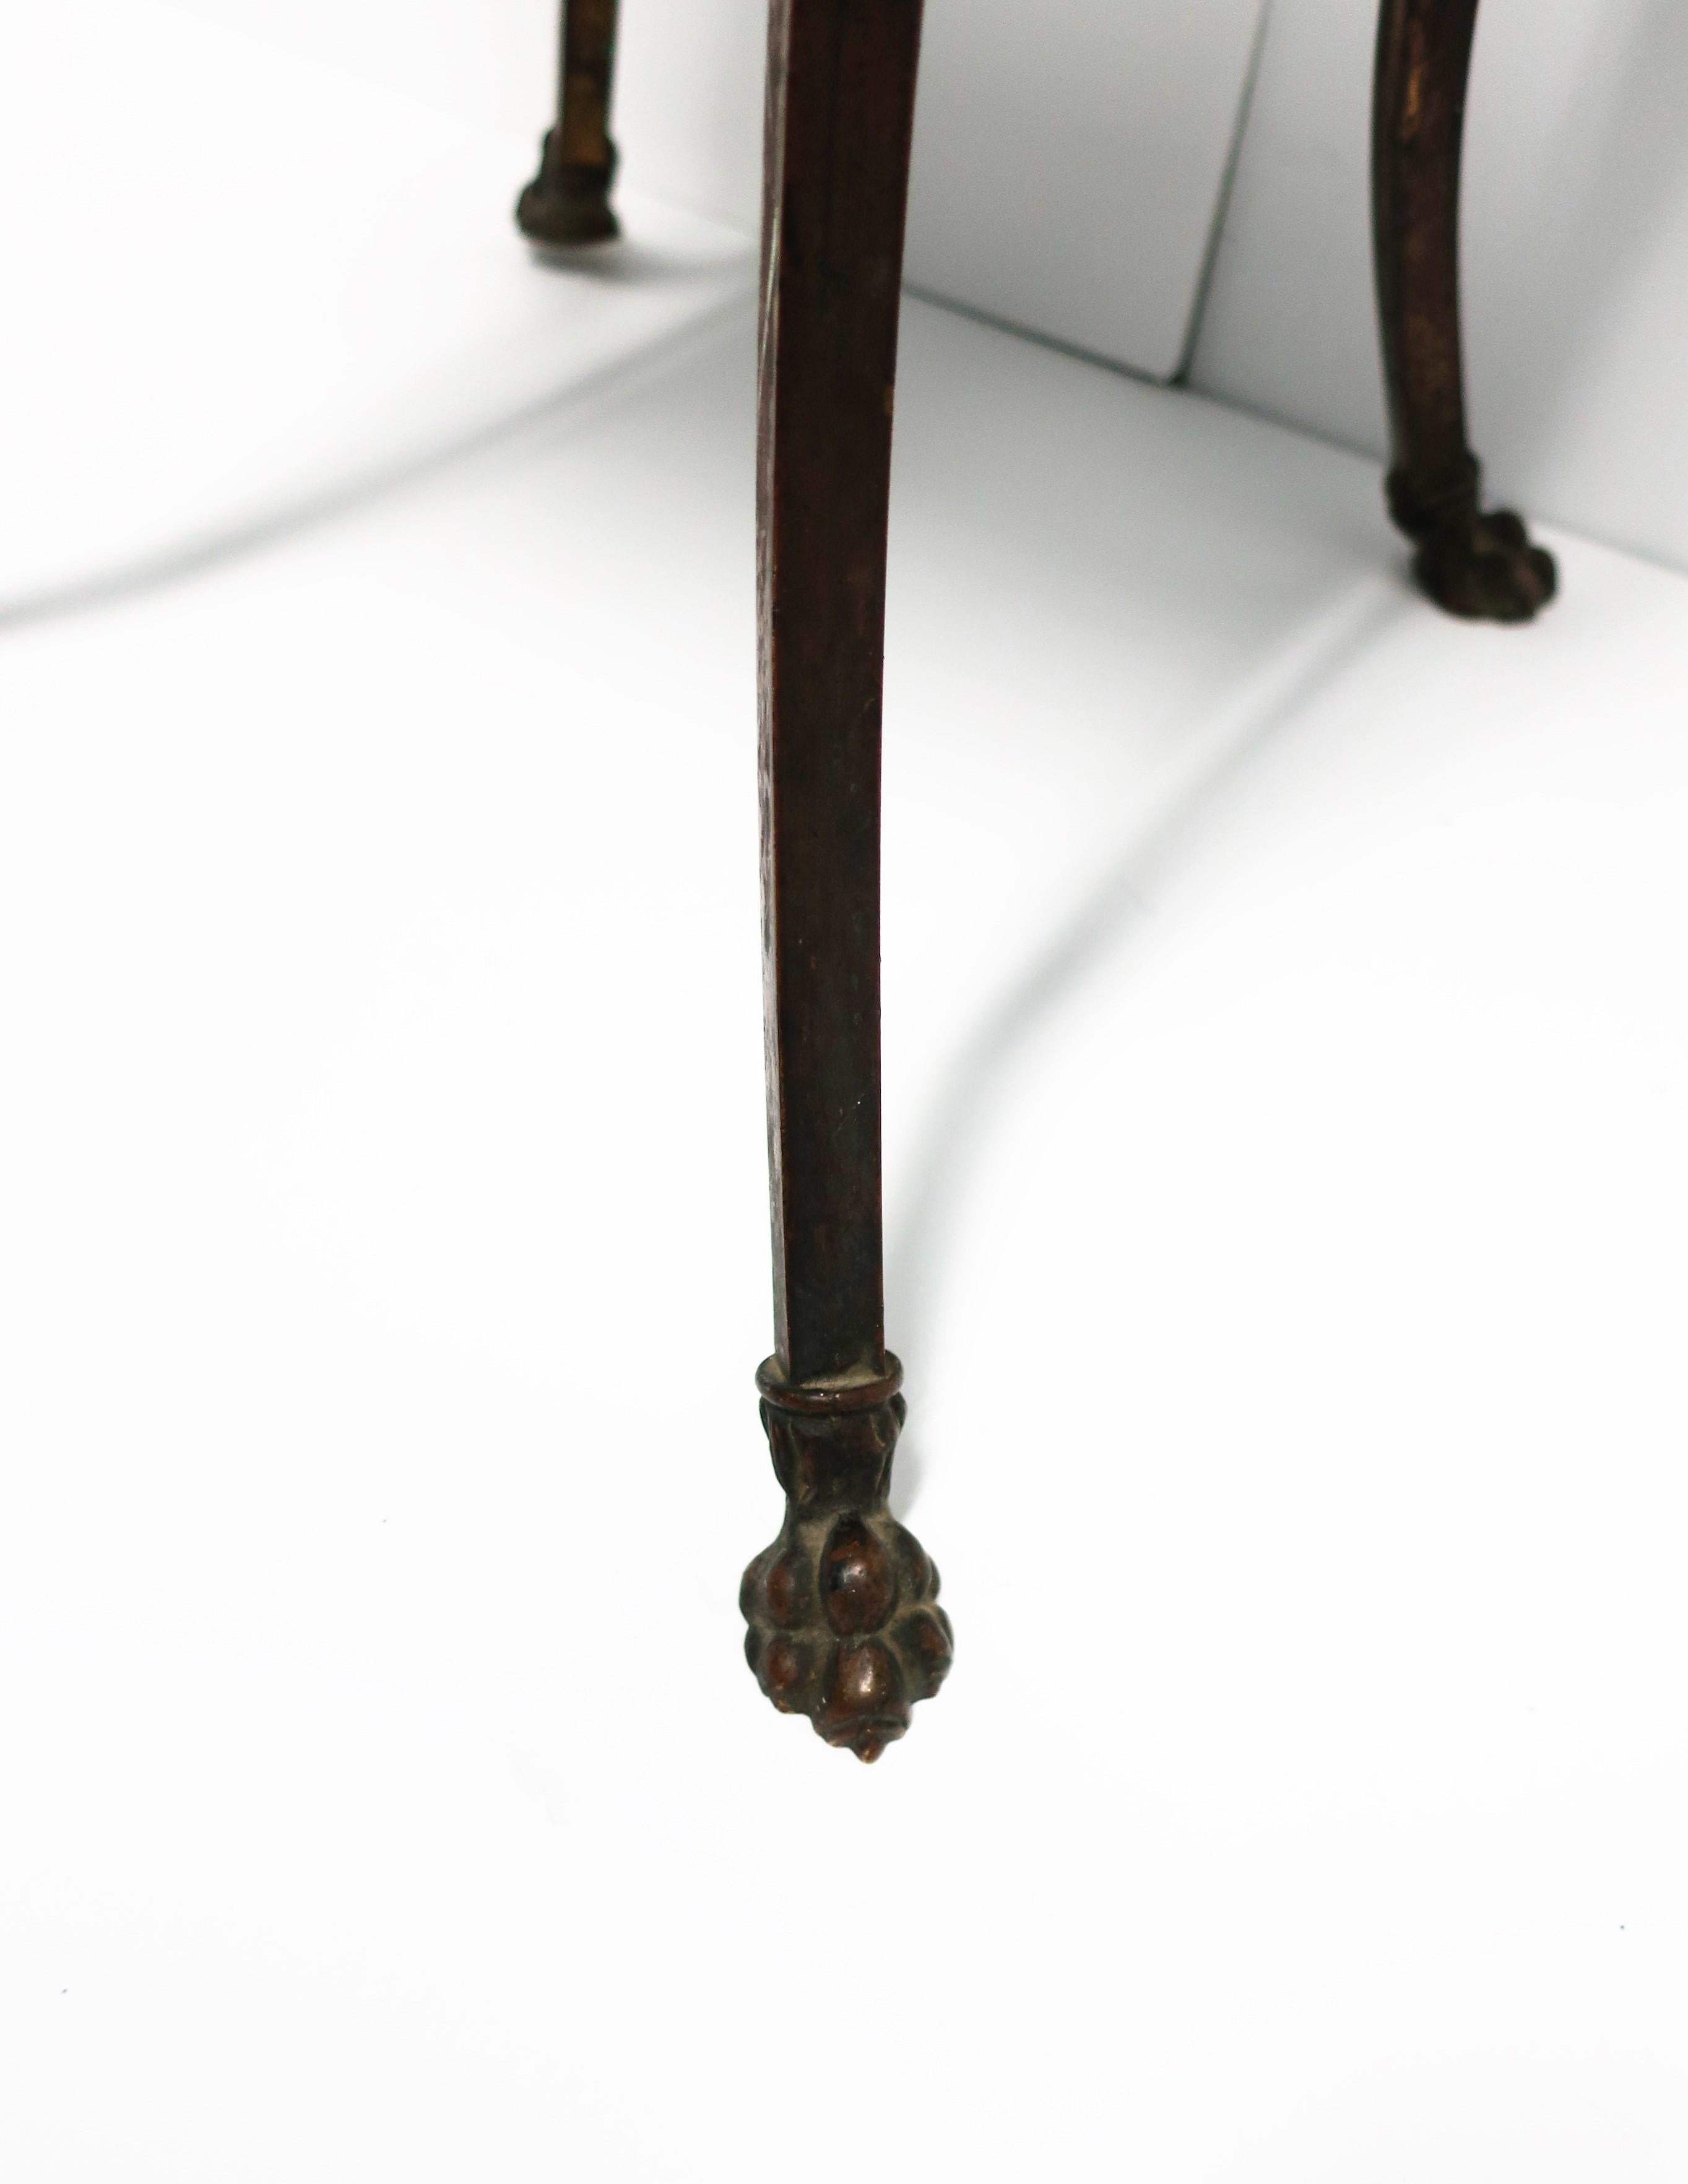 Bronze Pedestal Table with Shelf and Decorative Paw Feet, circa 19th Century 7